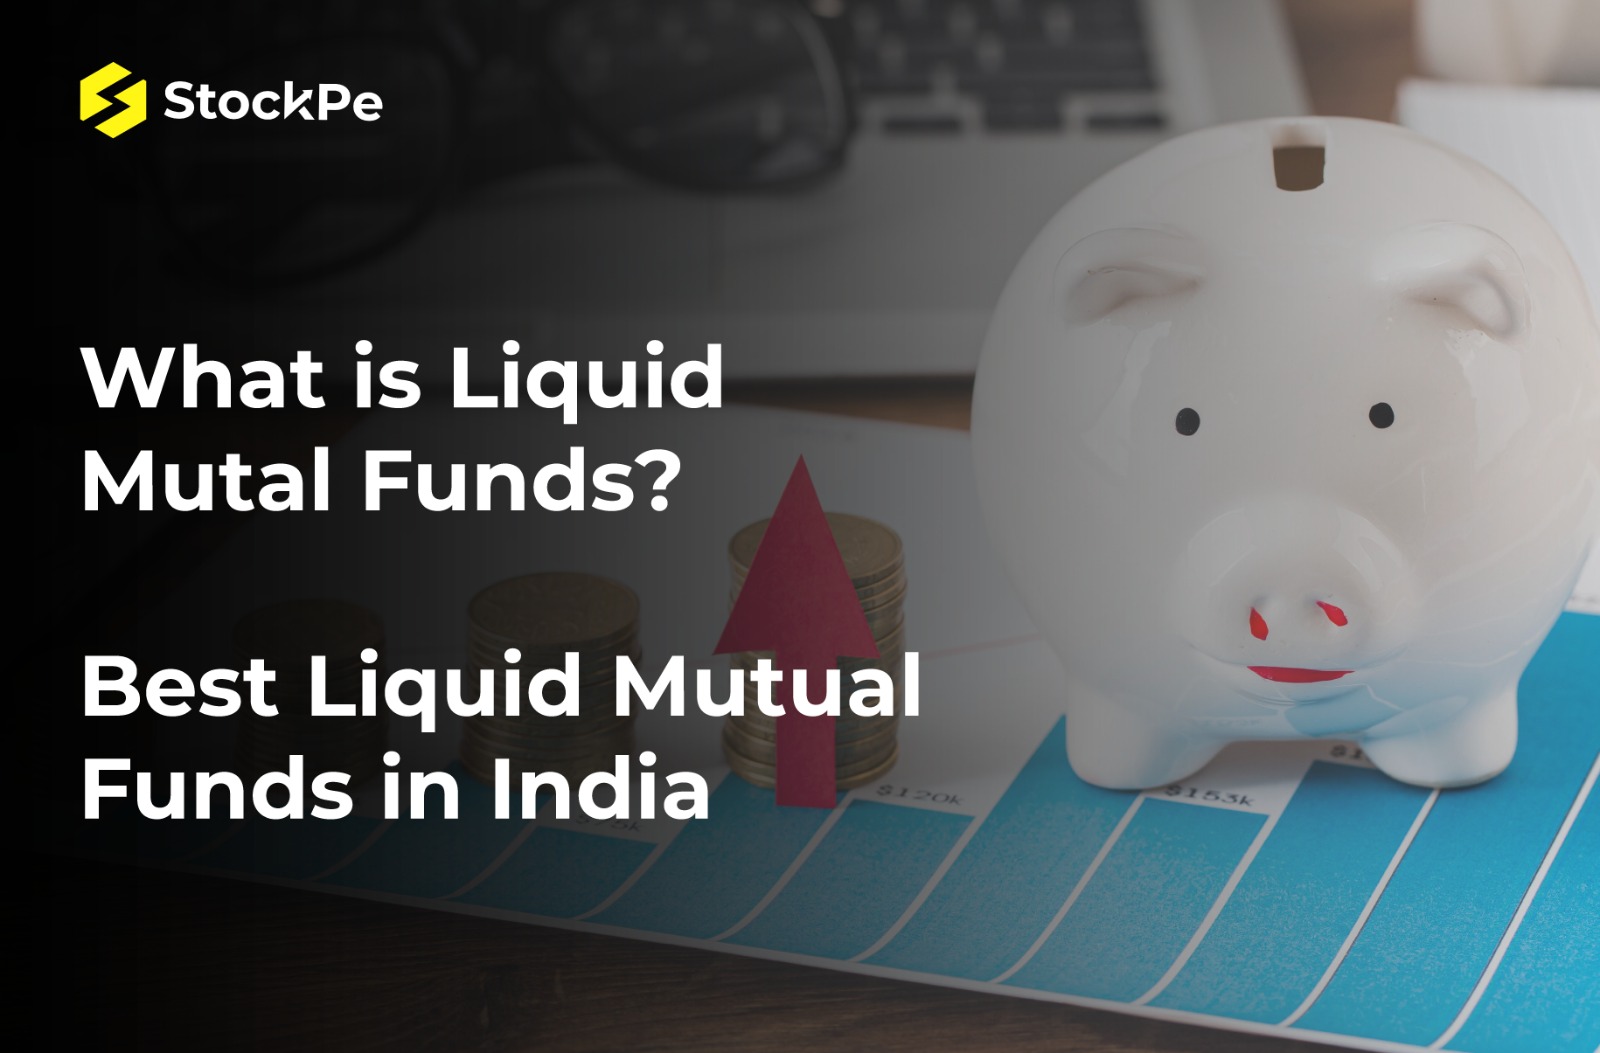 You are currently viewing What is Liquid Mutual Funds? Best Liquid Mutual Funds in India